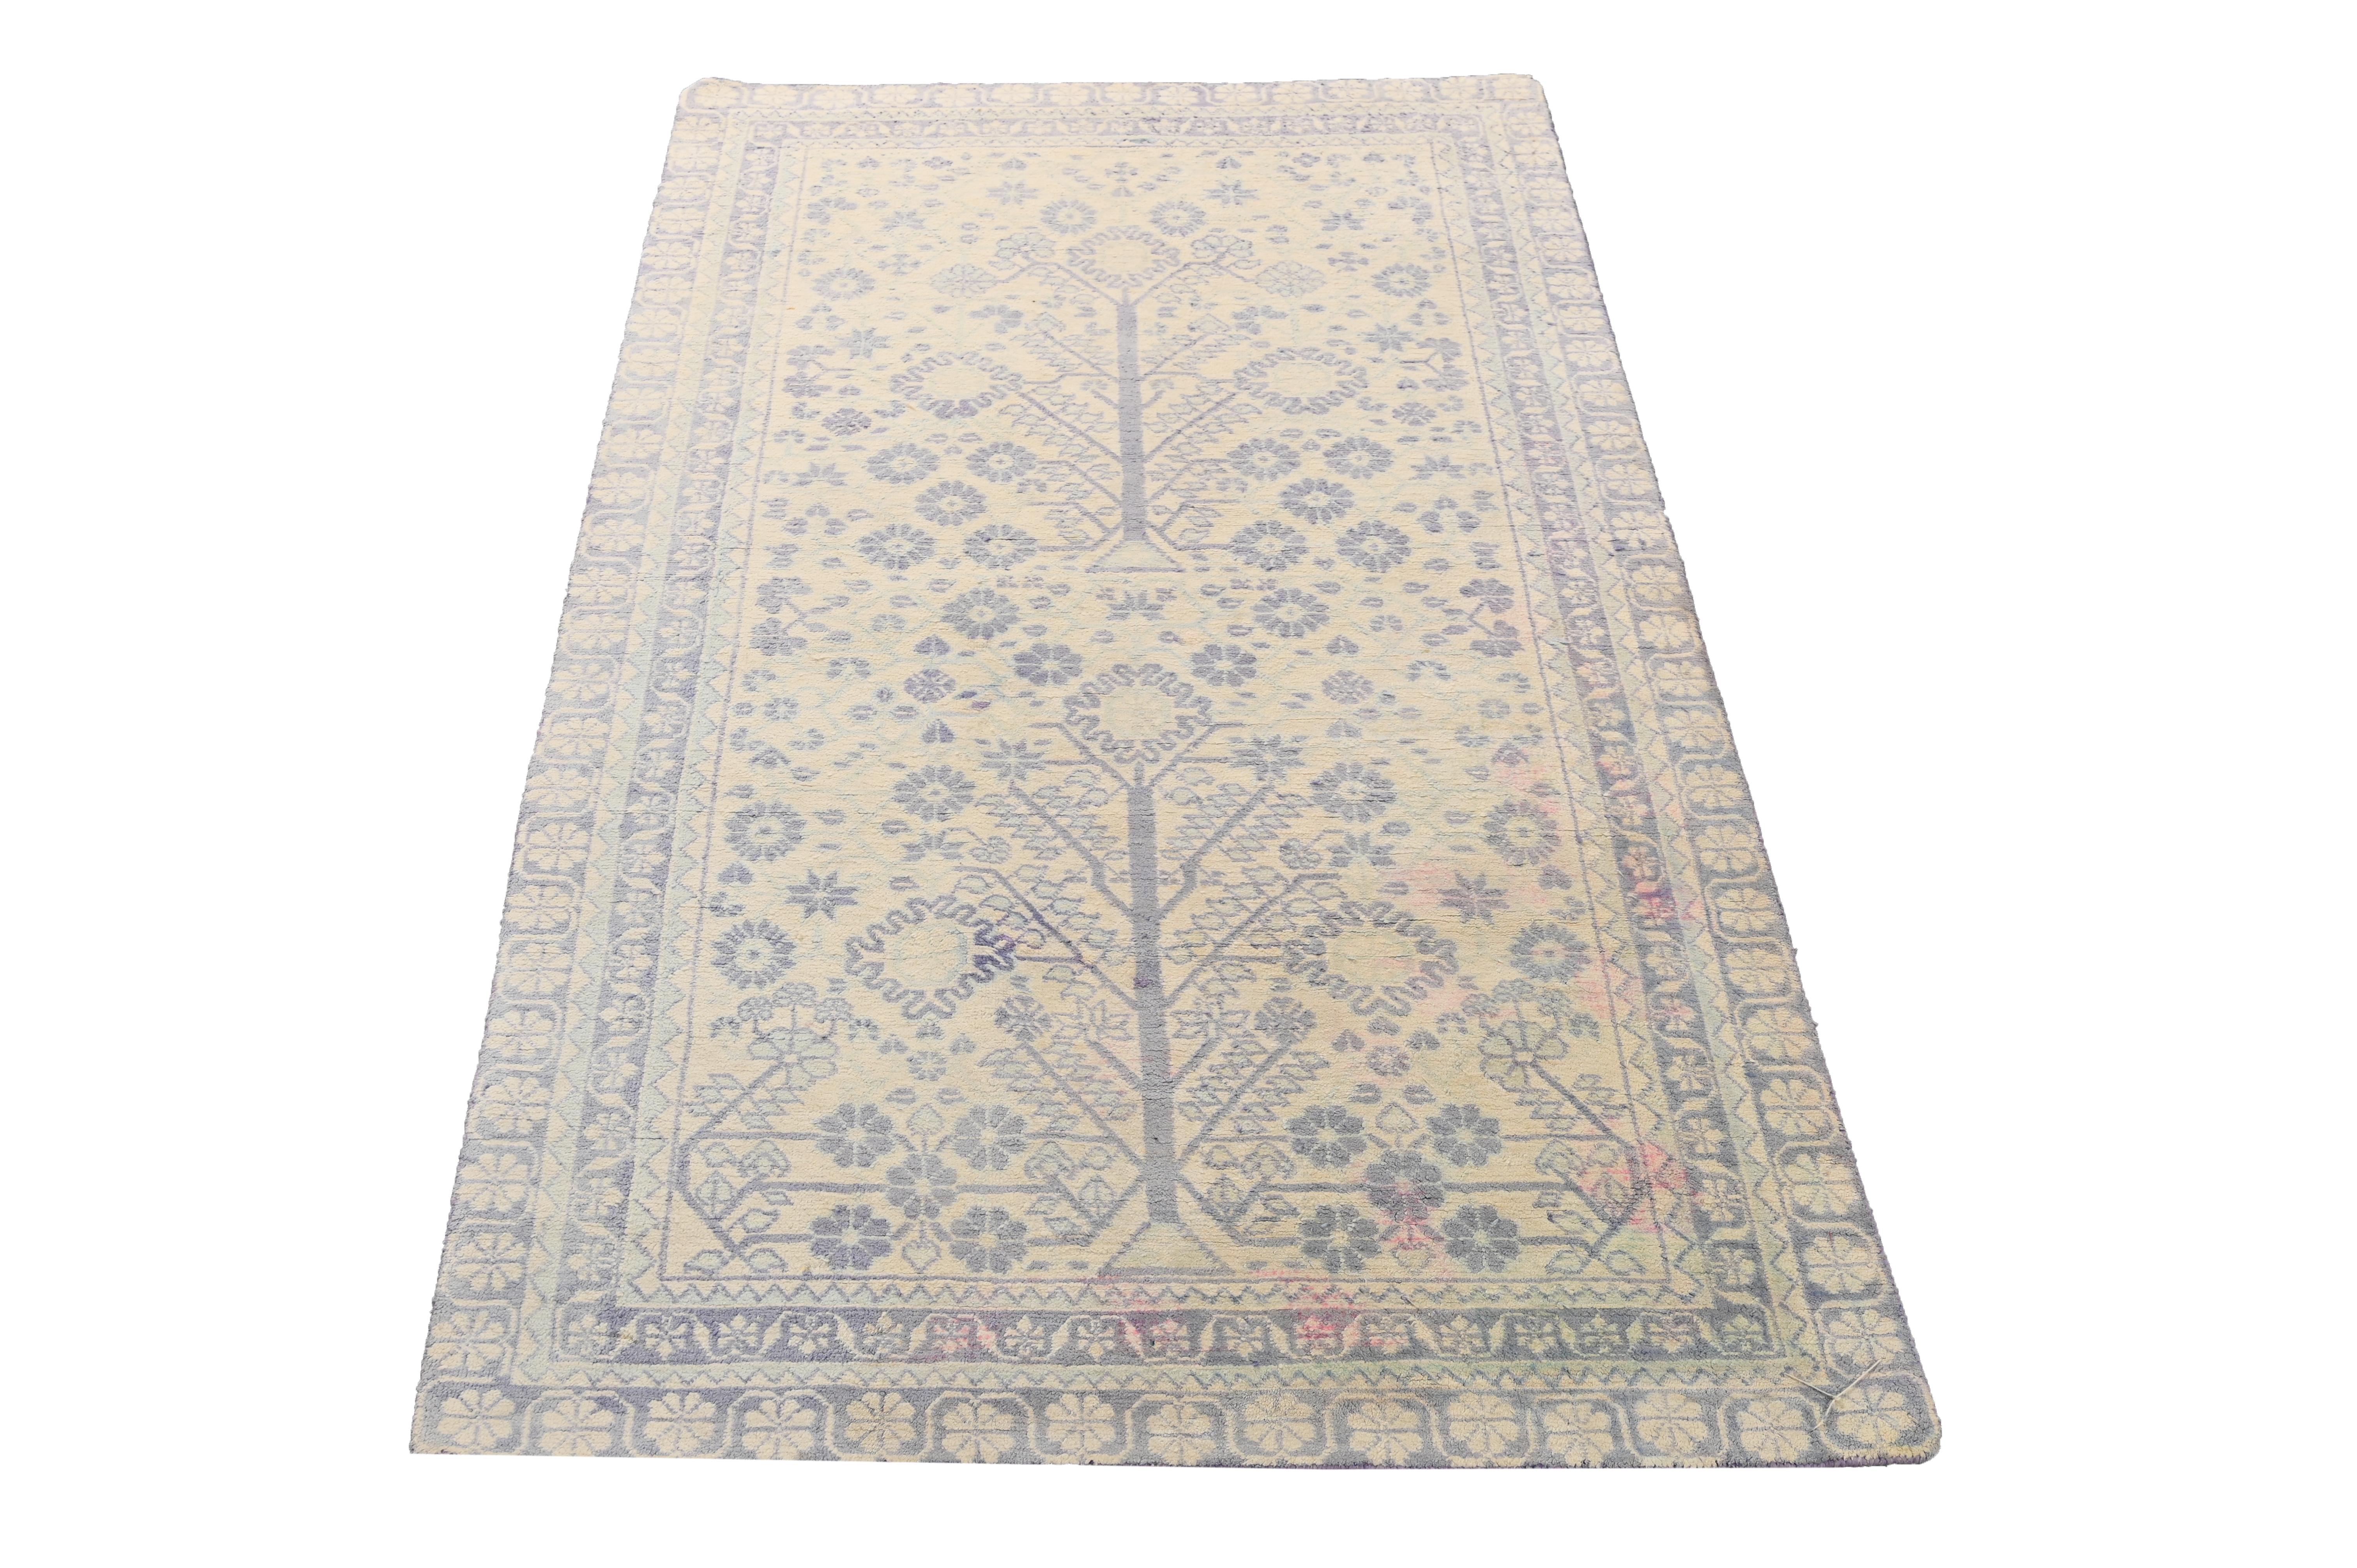 This vintage 4x6 Dhurrie is an exciting new entry in Rug & Kilim's esteemed flat weave collection. Handwoven in cotton, it originates from India circa 1950-1960. 

Further on the Design:

This flat weave prefers floral geometric patterns in blue